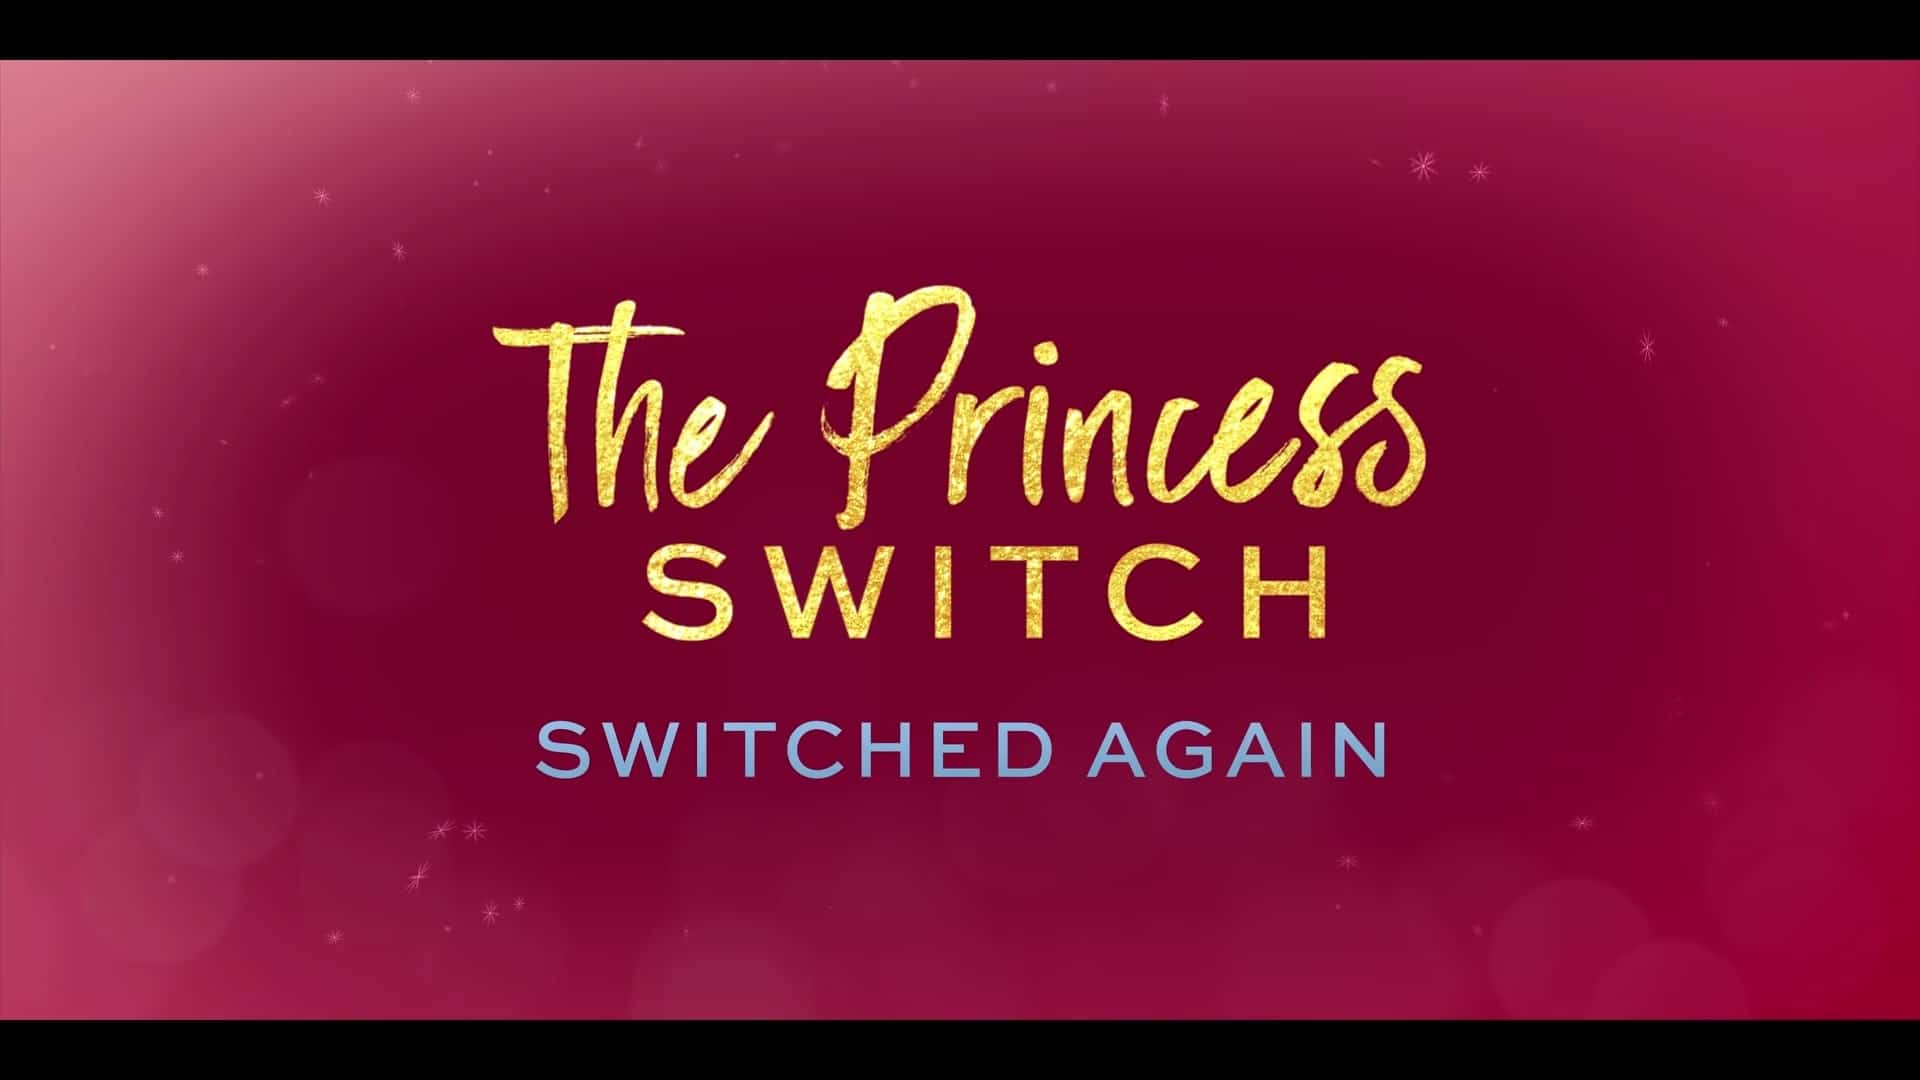 Netflix The Princess Switch 2 Trailer, Netflix Family Moves, Netflix Romantic Comedy Movies, Netflix Christmas Movies, Coming to Netflix in November 2020